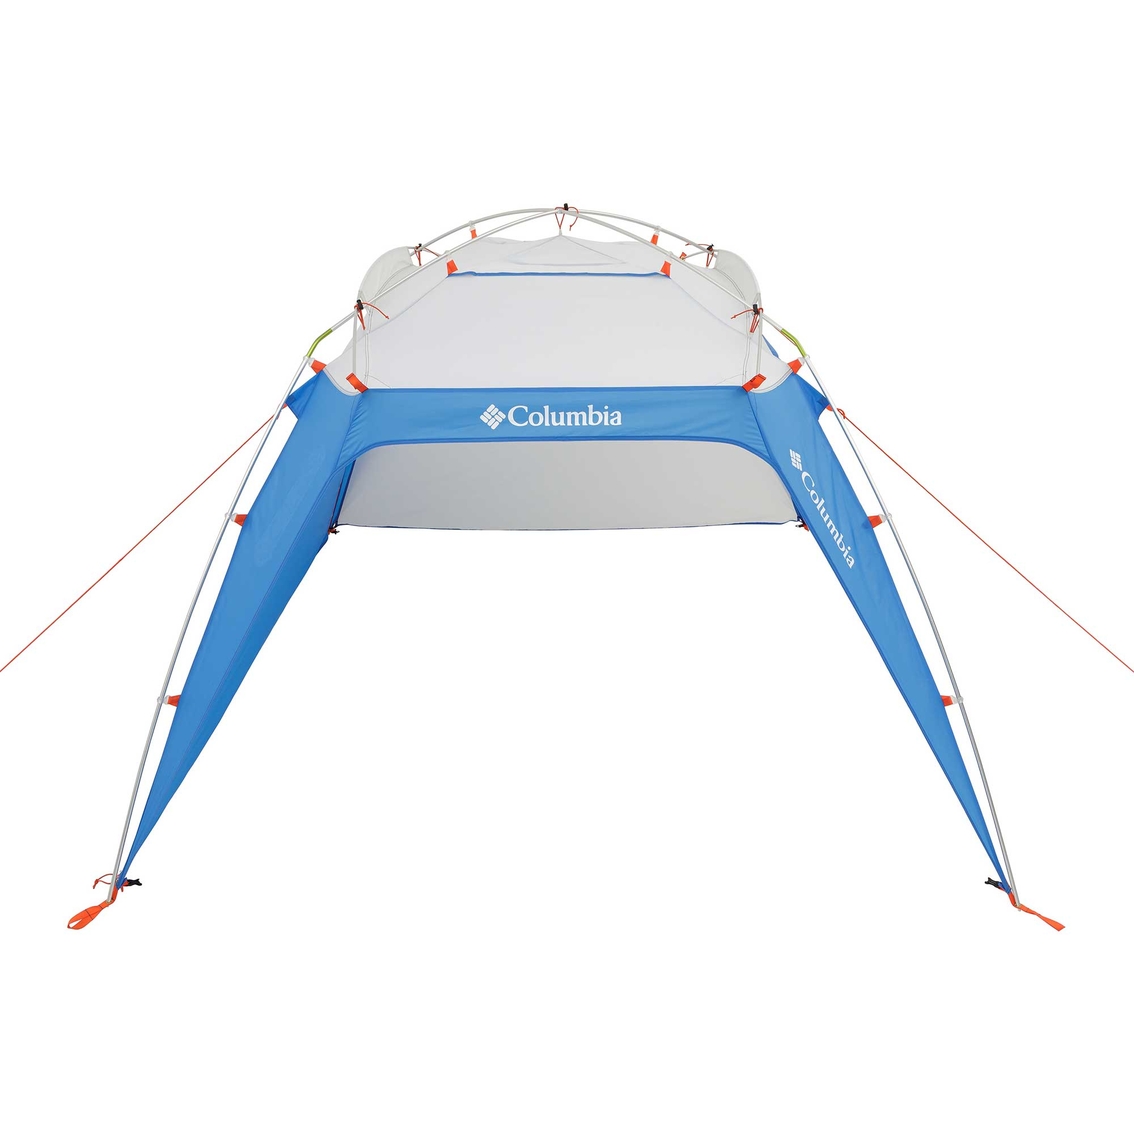 Columbia 8 x 8 ft. Sport Shade - Image 5 of 10